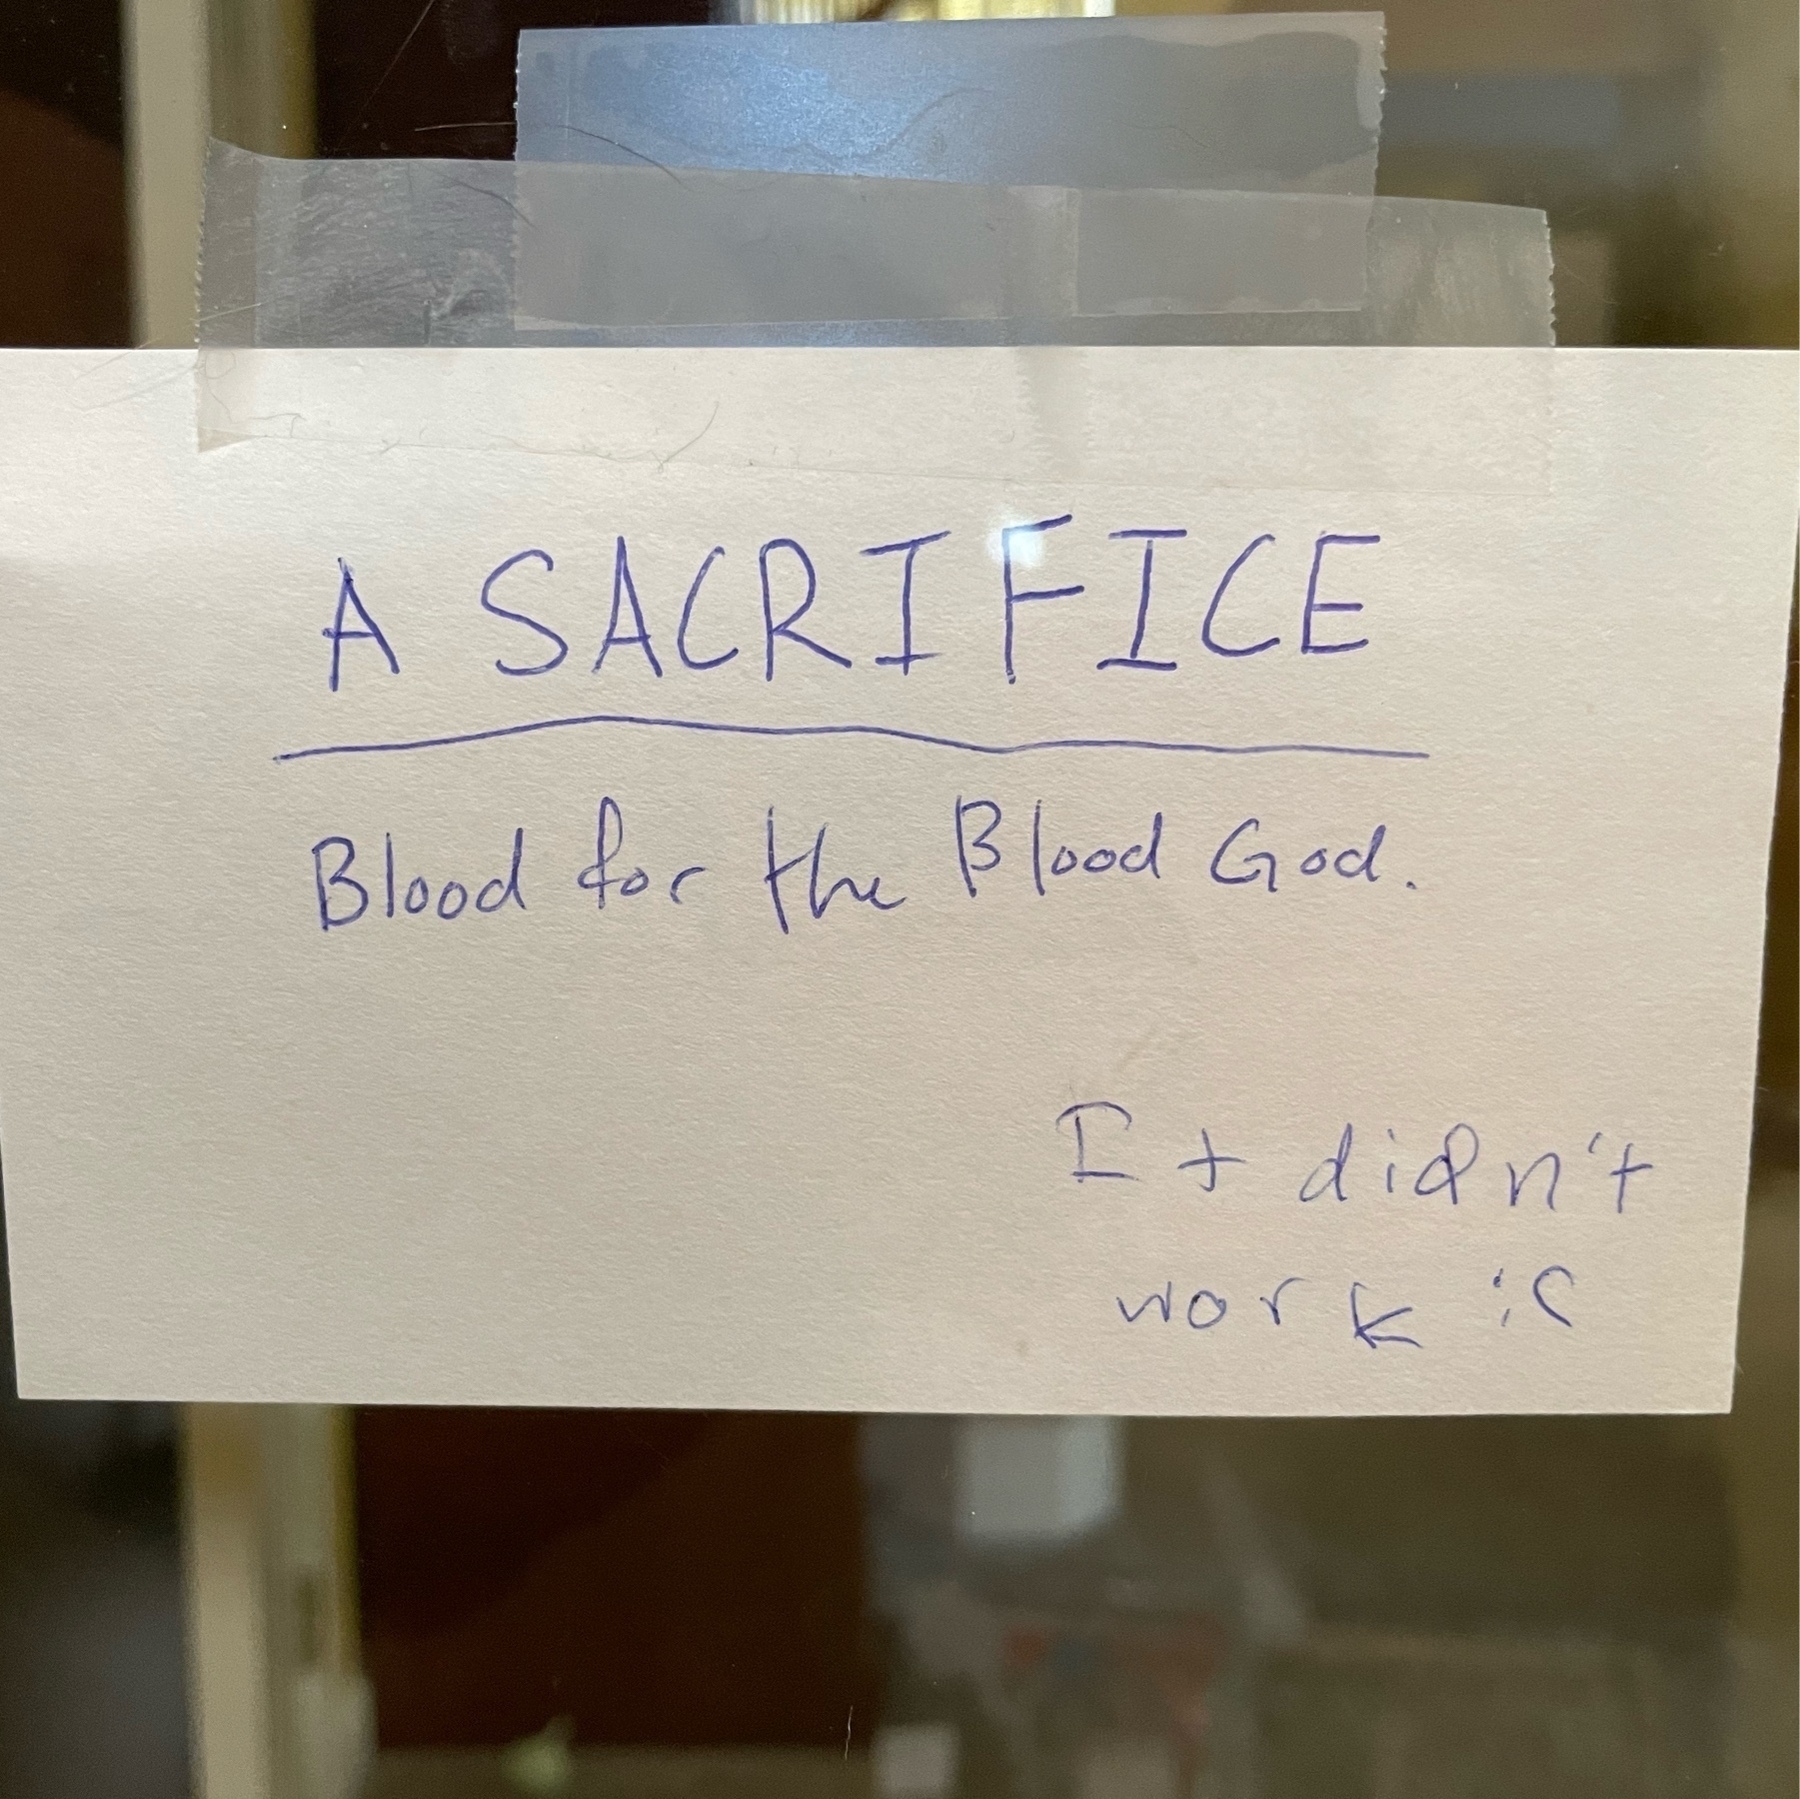 Handmade sign reading: A Sacrifice; Blood for the Blood God. Then in the lower right corner: It didn't work.